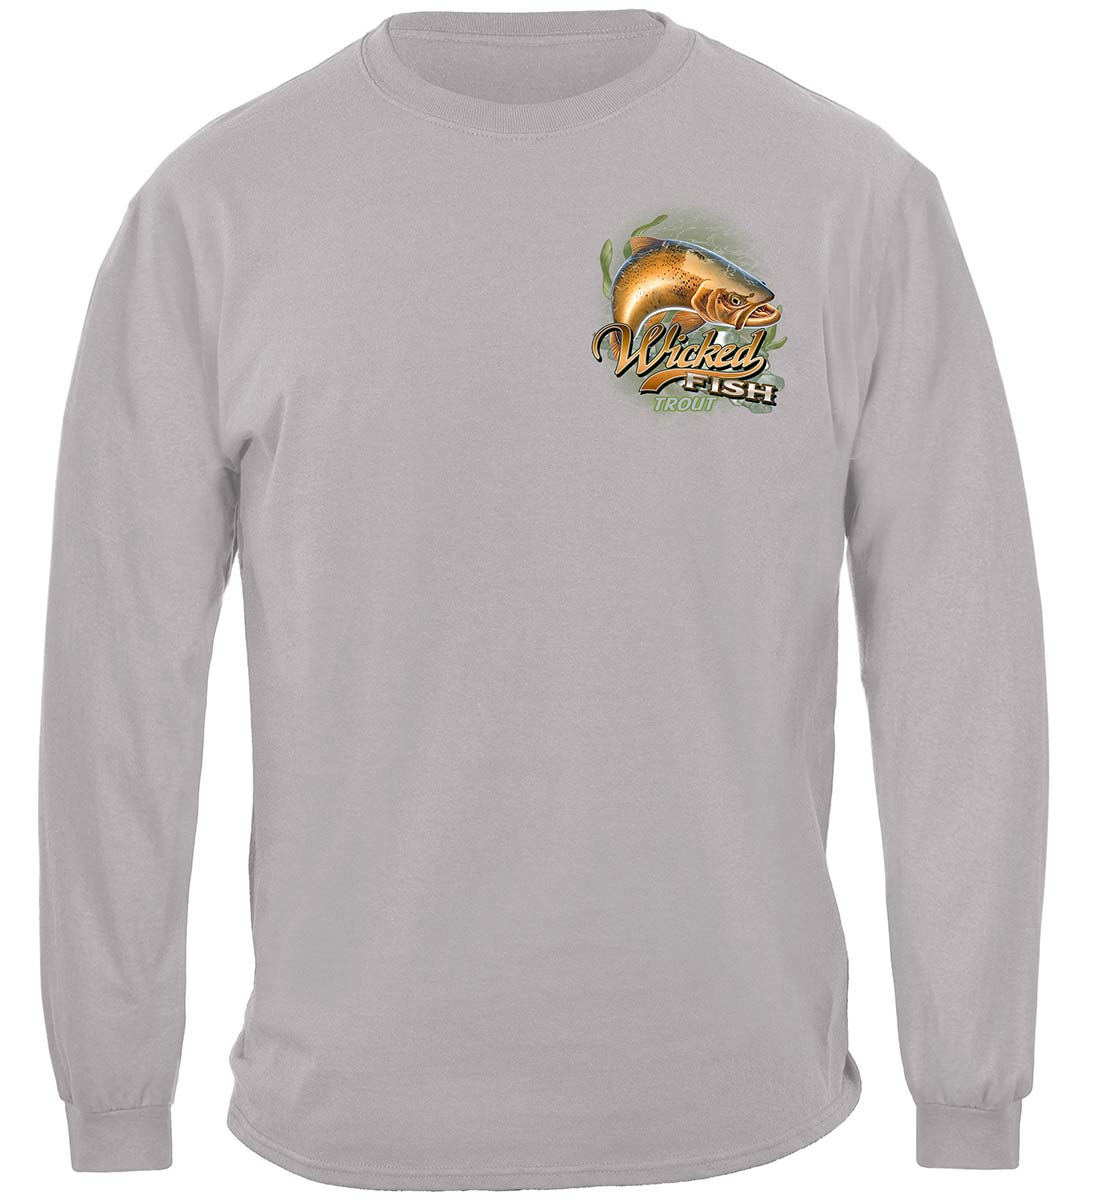 Wicked Fish Trout Premium Hooded Sweat Shirt